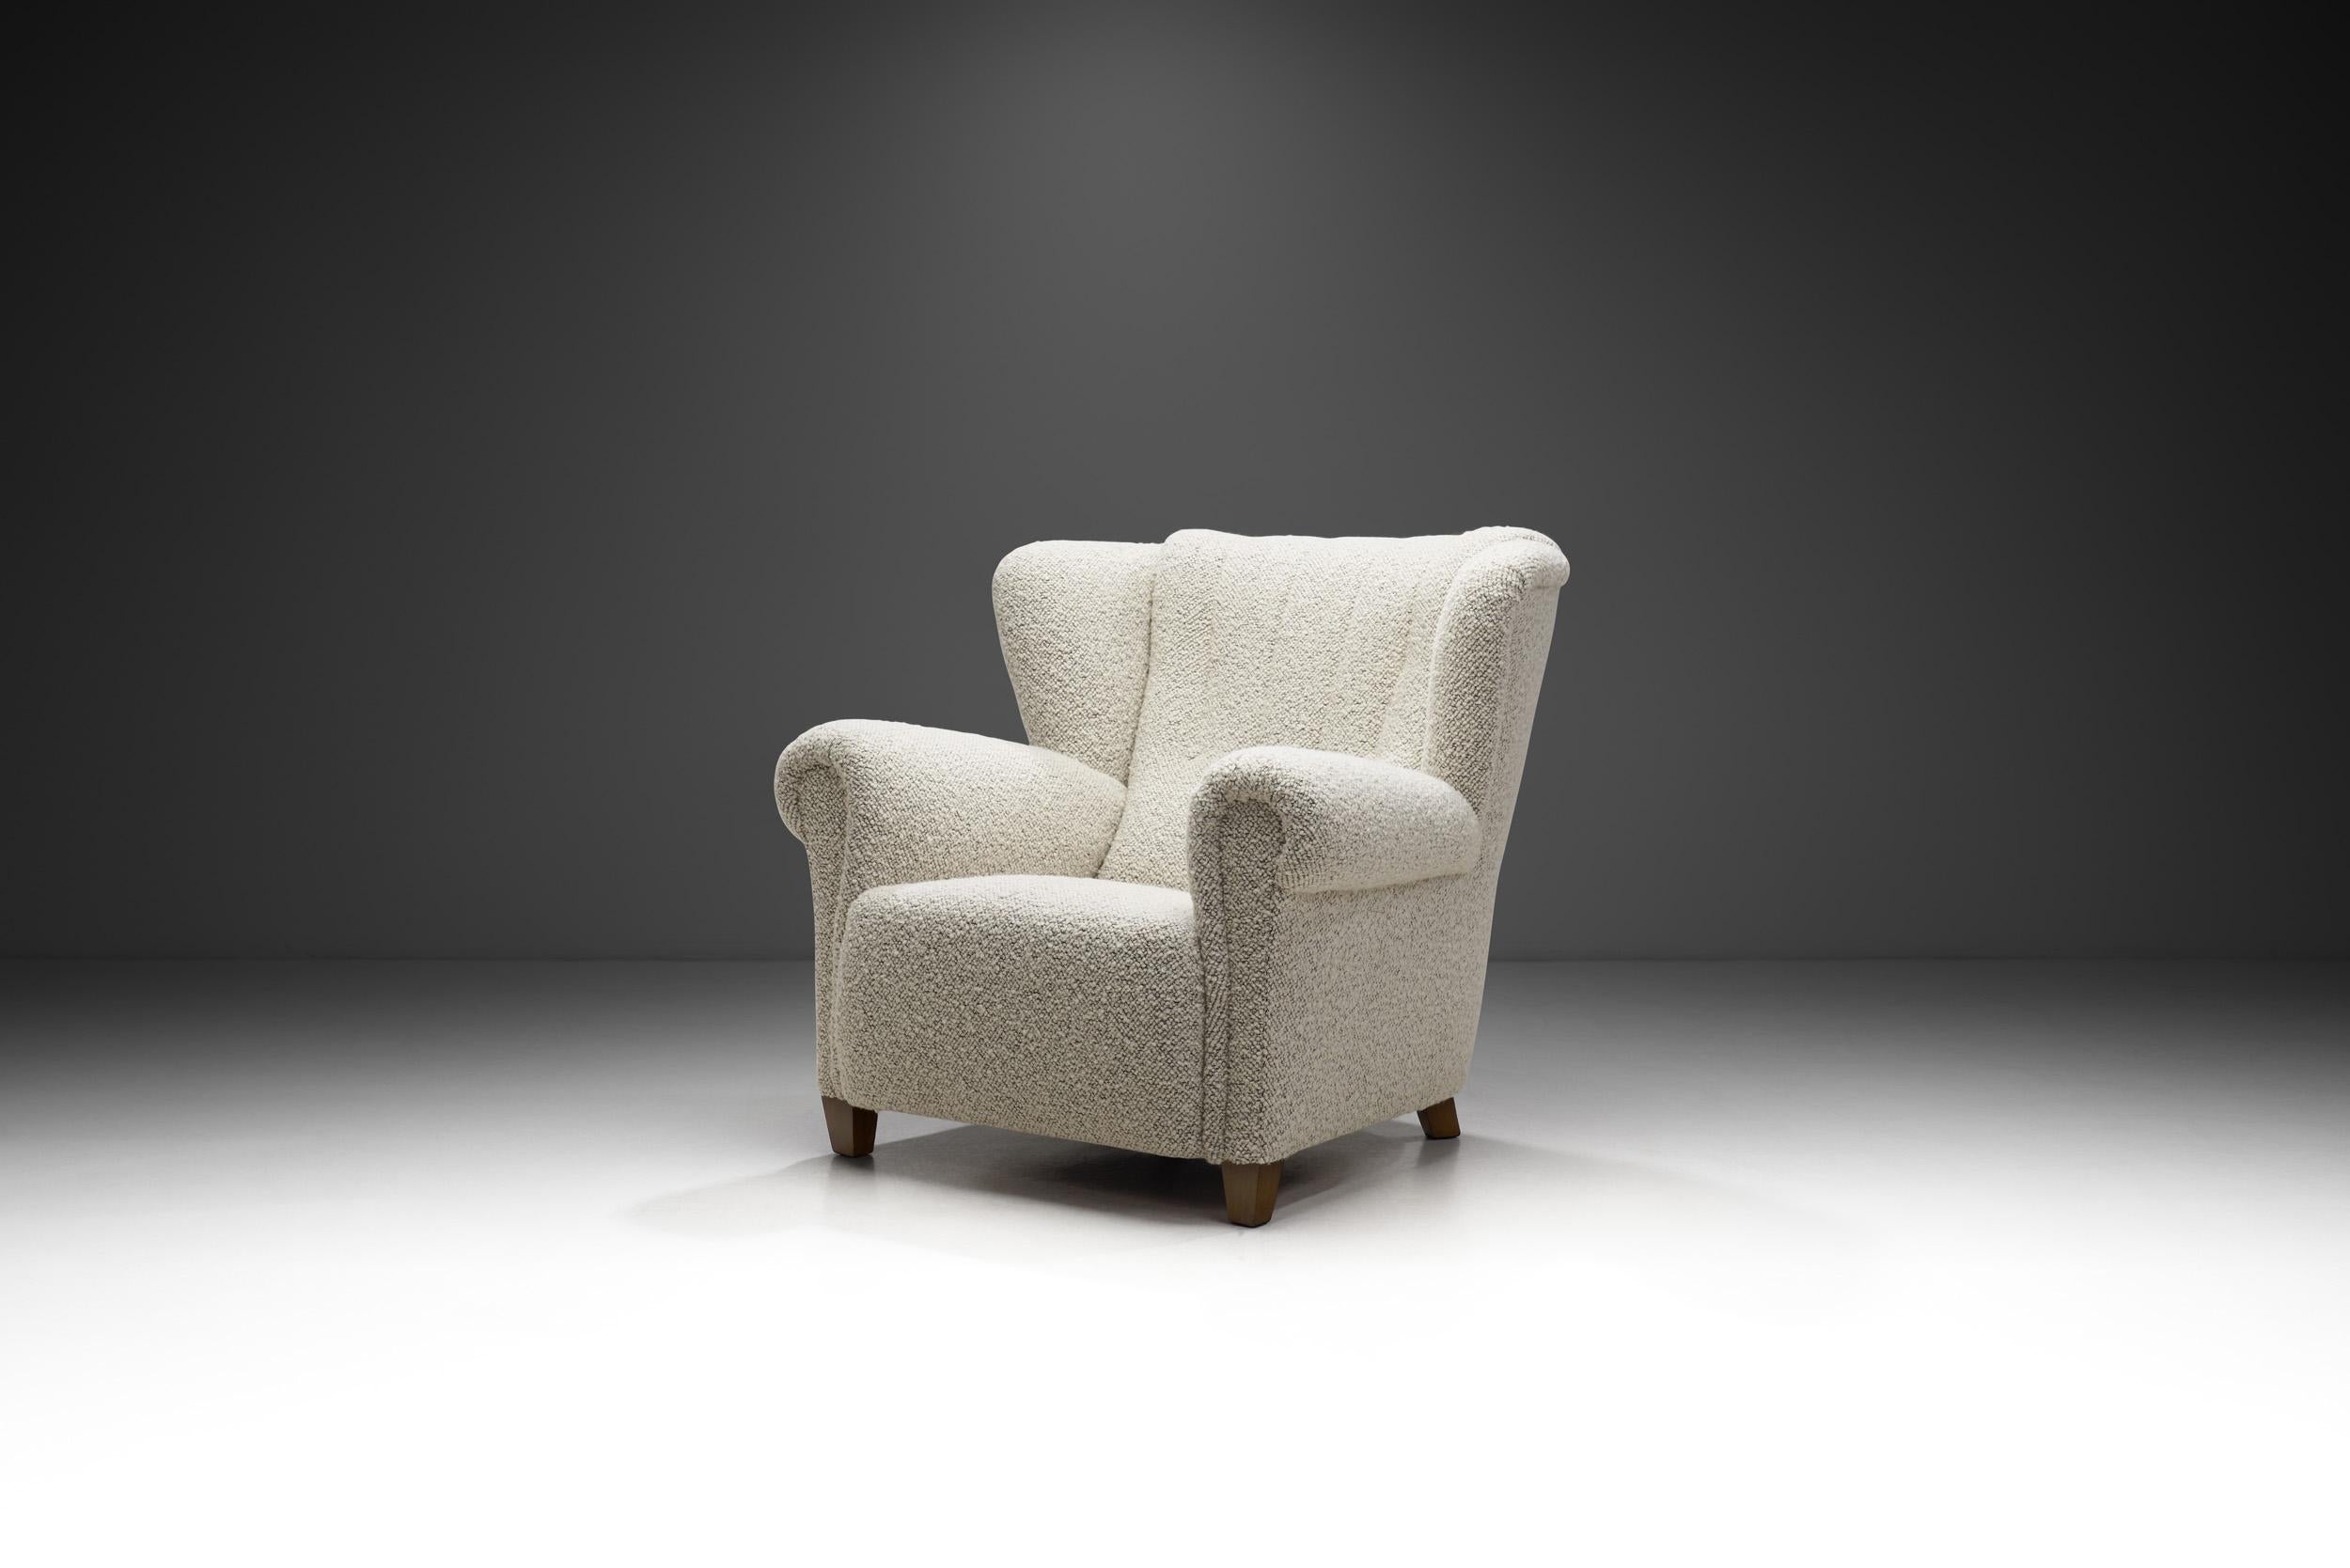 Time has not diminished the relevance of Danish design, especially of the pieces that were created in the middle of the last century, like this lounge chair. This mainly because the movement’s core concepts such as quality, functionality, and the